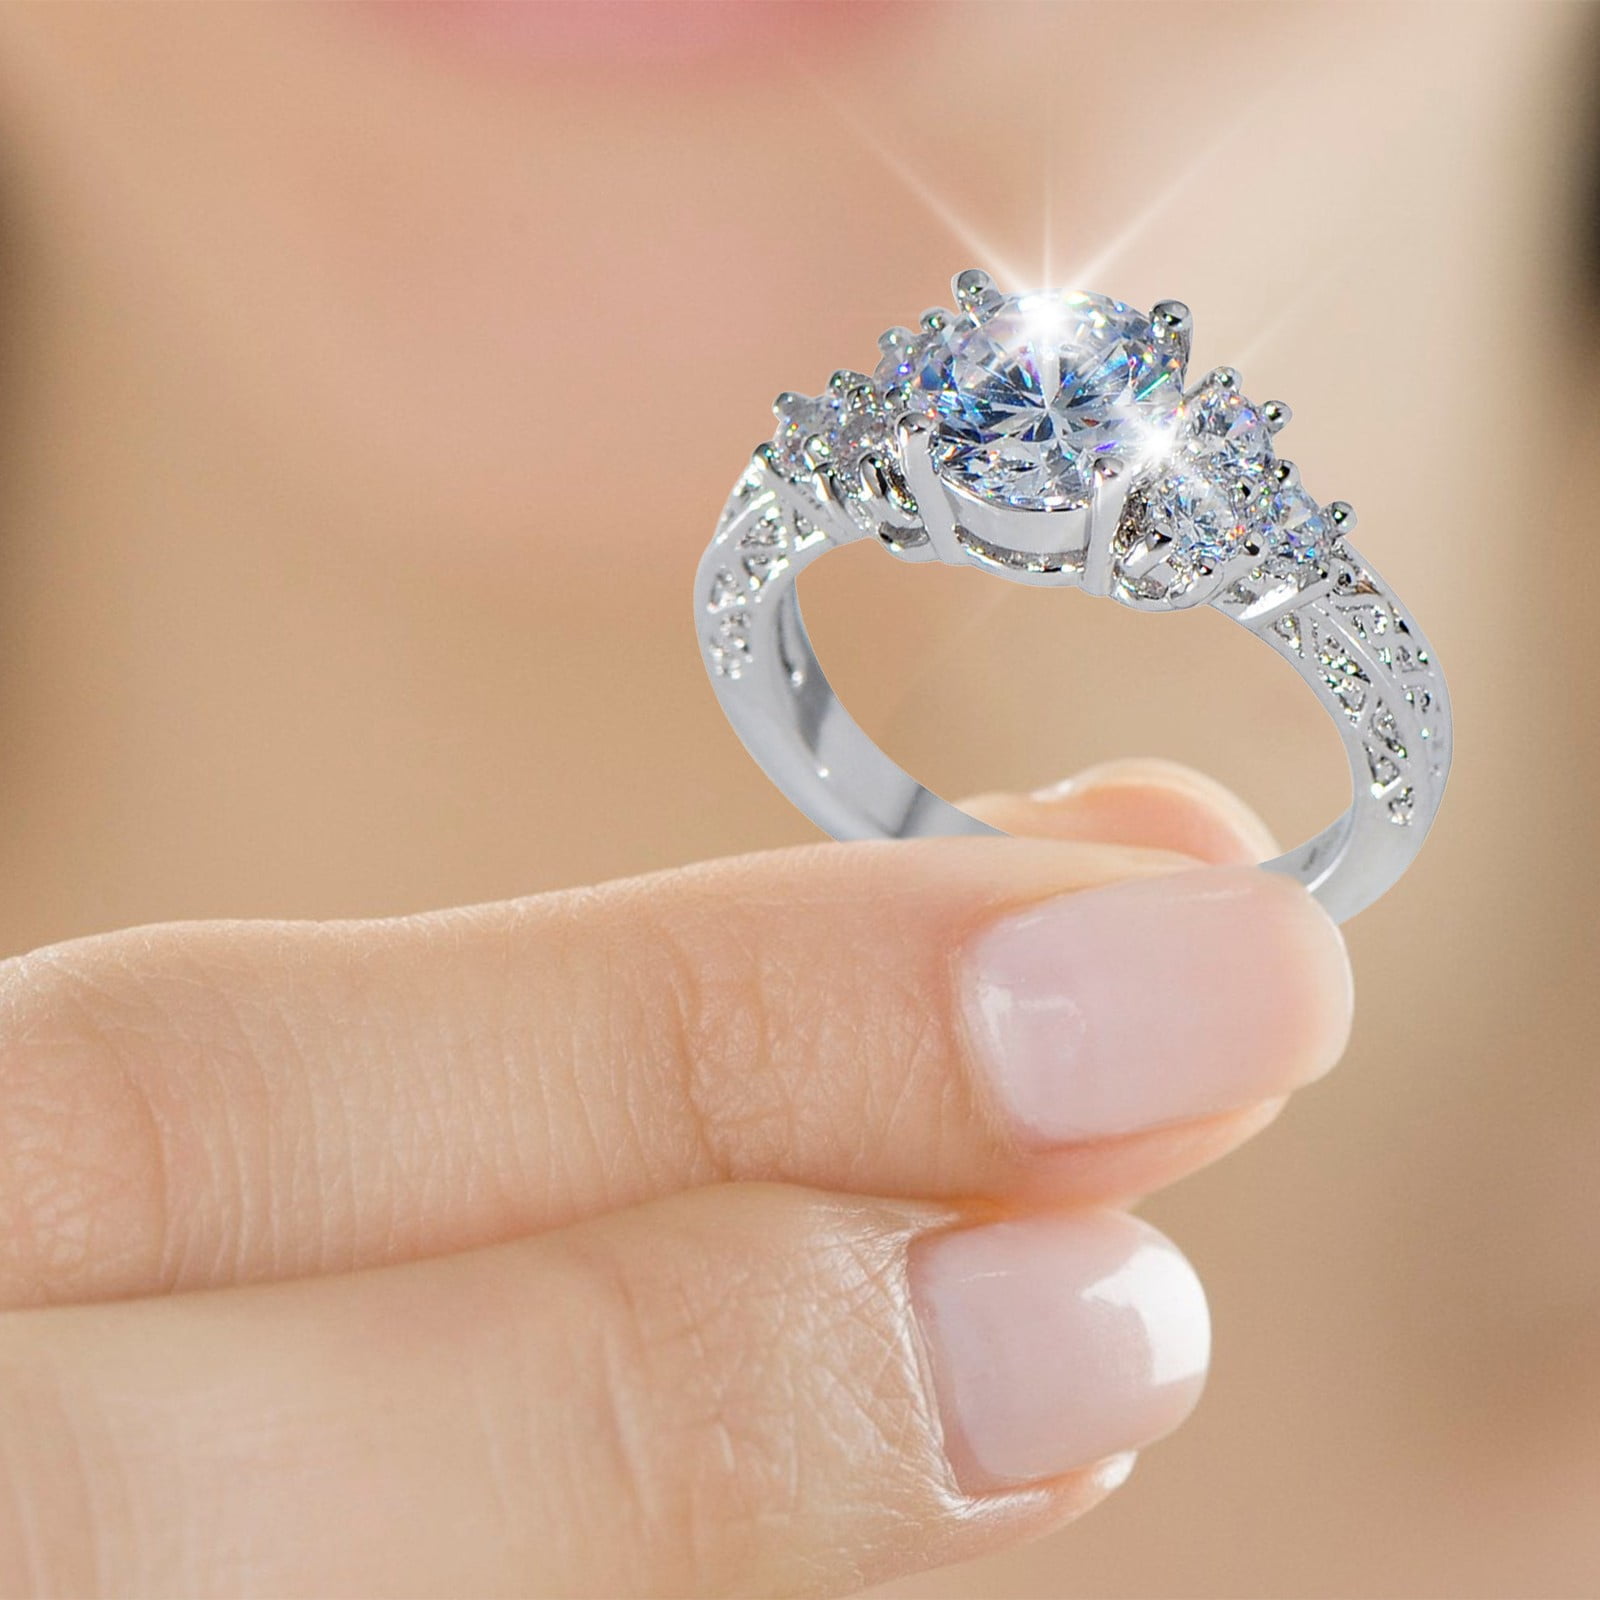 Which Finger Does a Wedding Ring Go On? - Clean Origin Blog